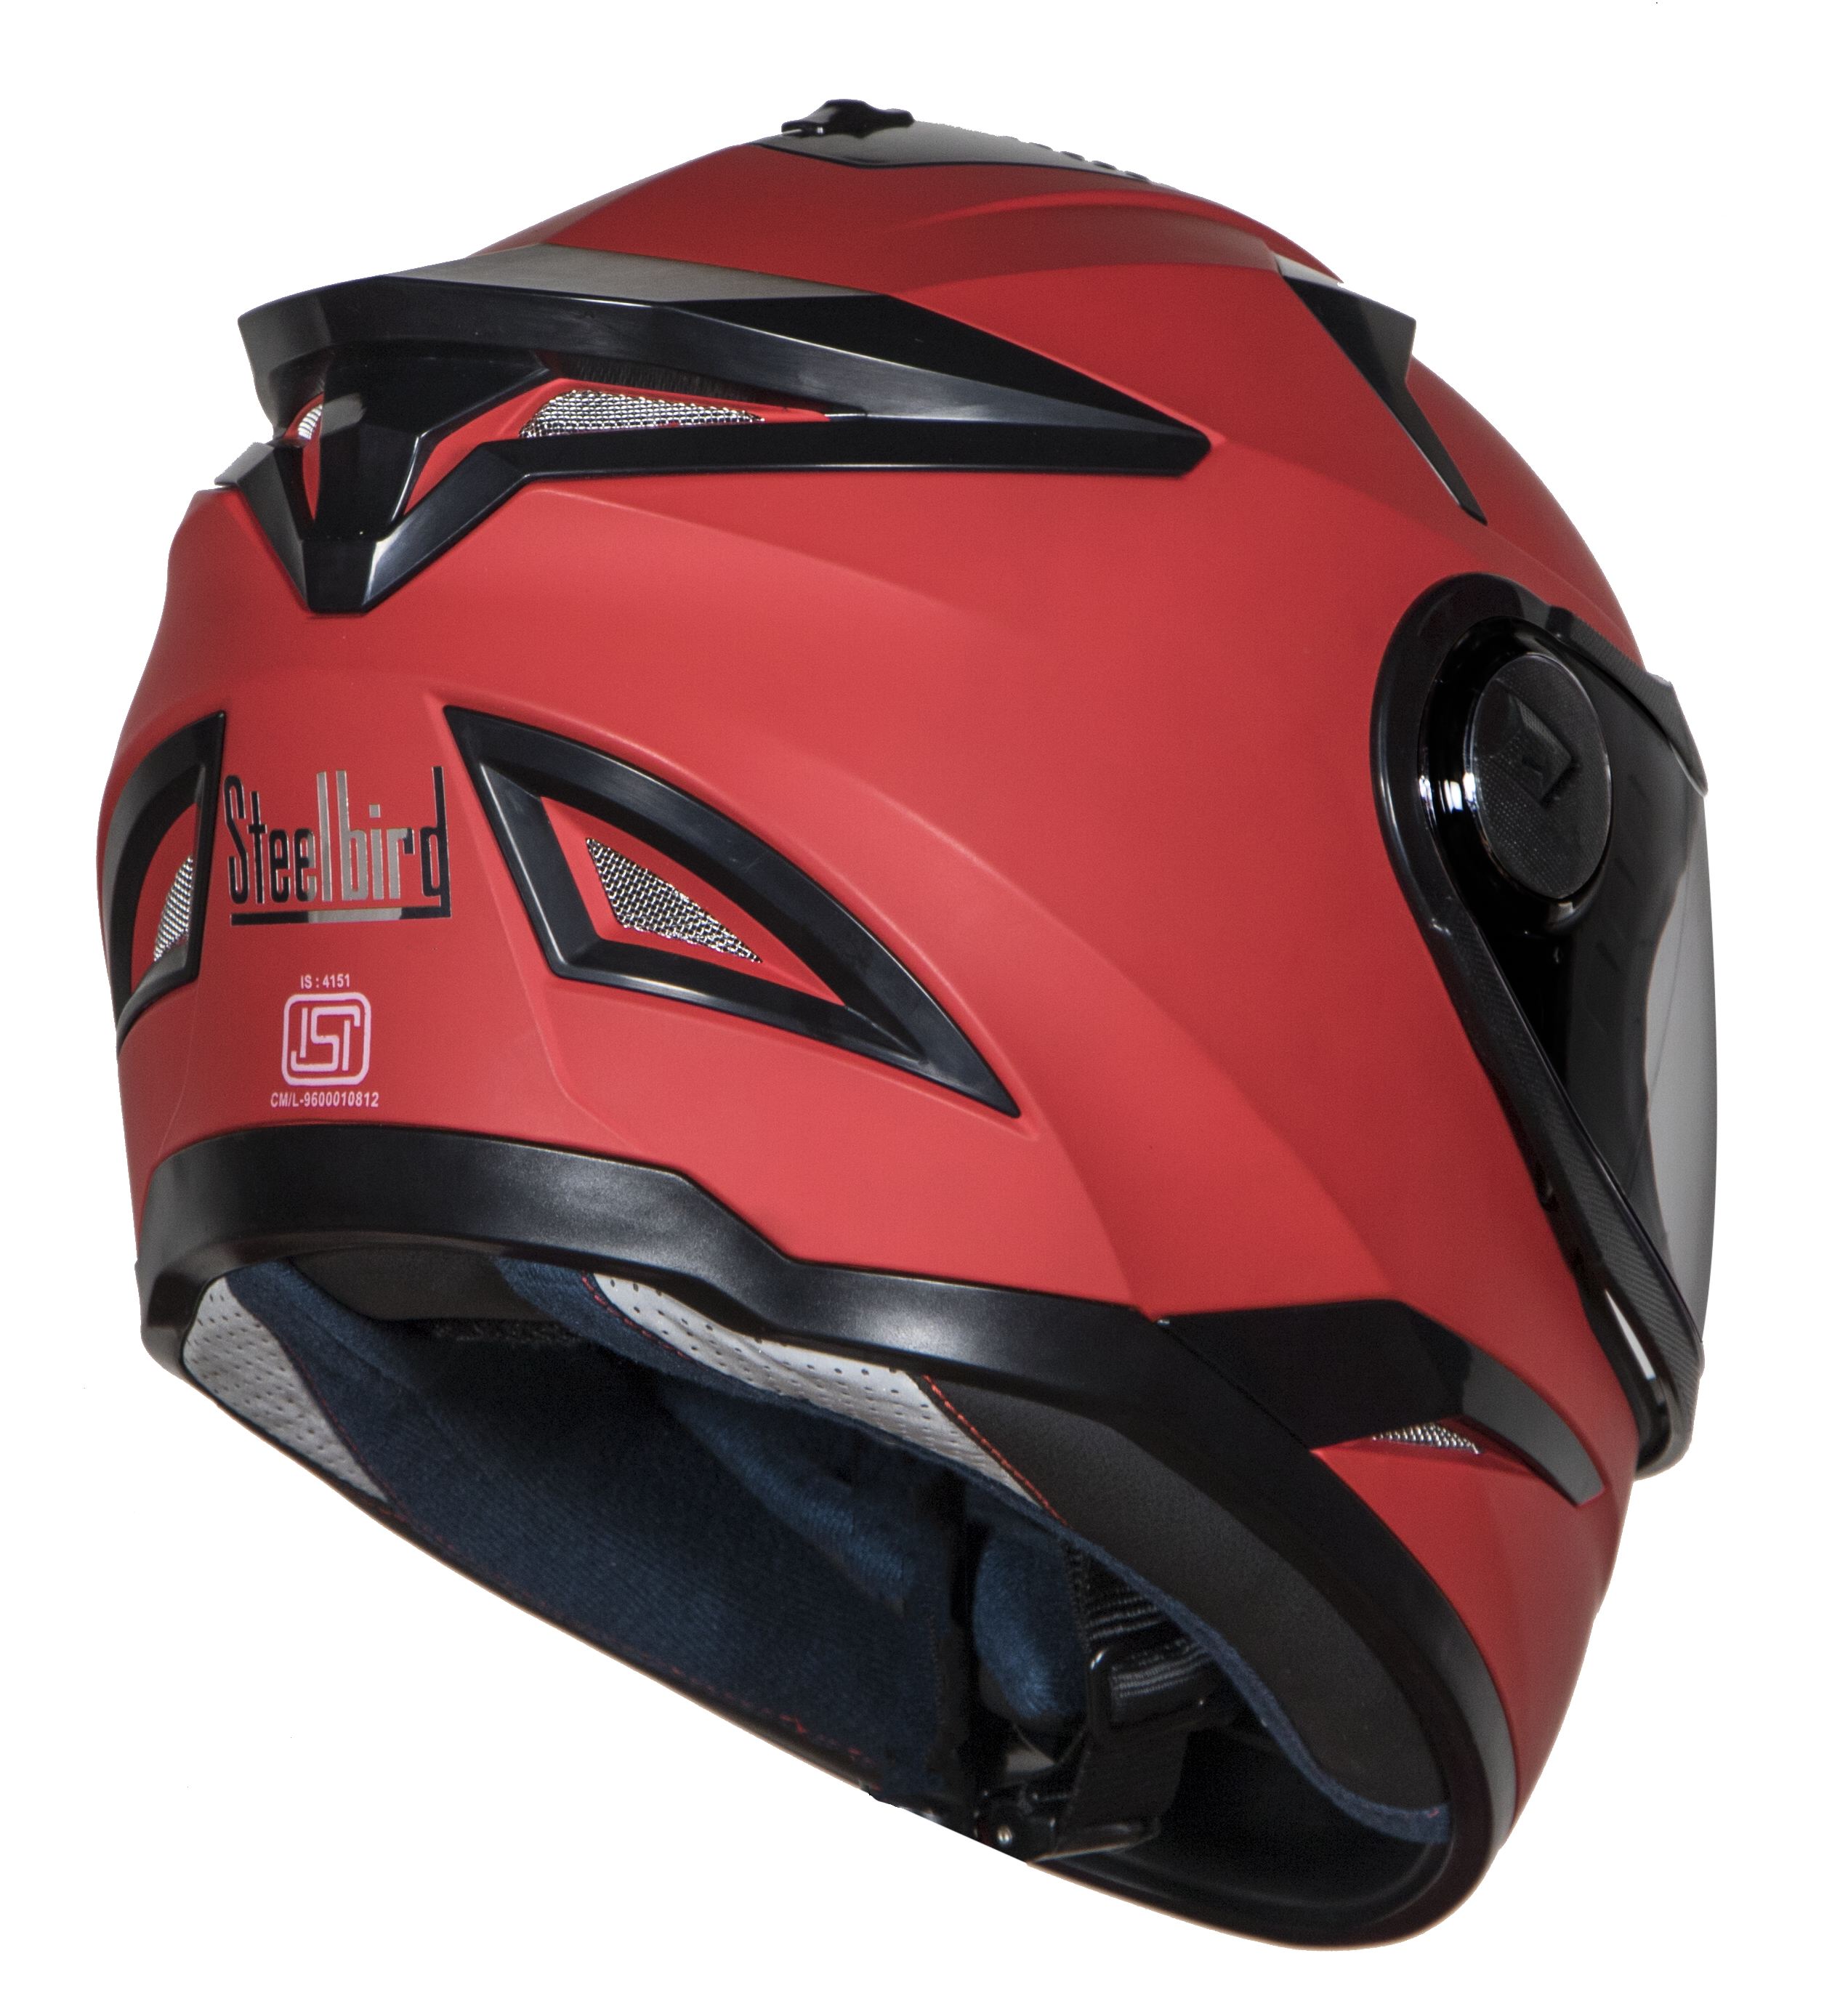 SBH-17 OPT MAT SPORTS (WITH EXTRA FREE CABLE LOCK AND CLEAR VISOR)